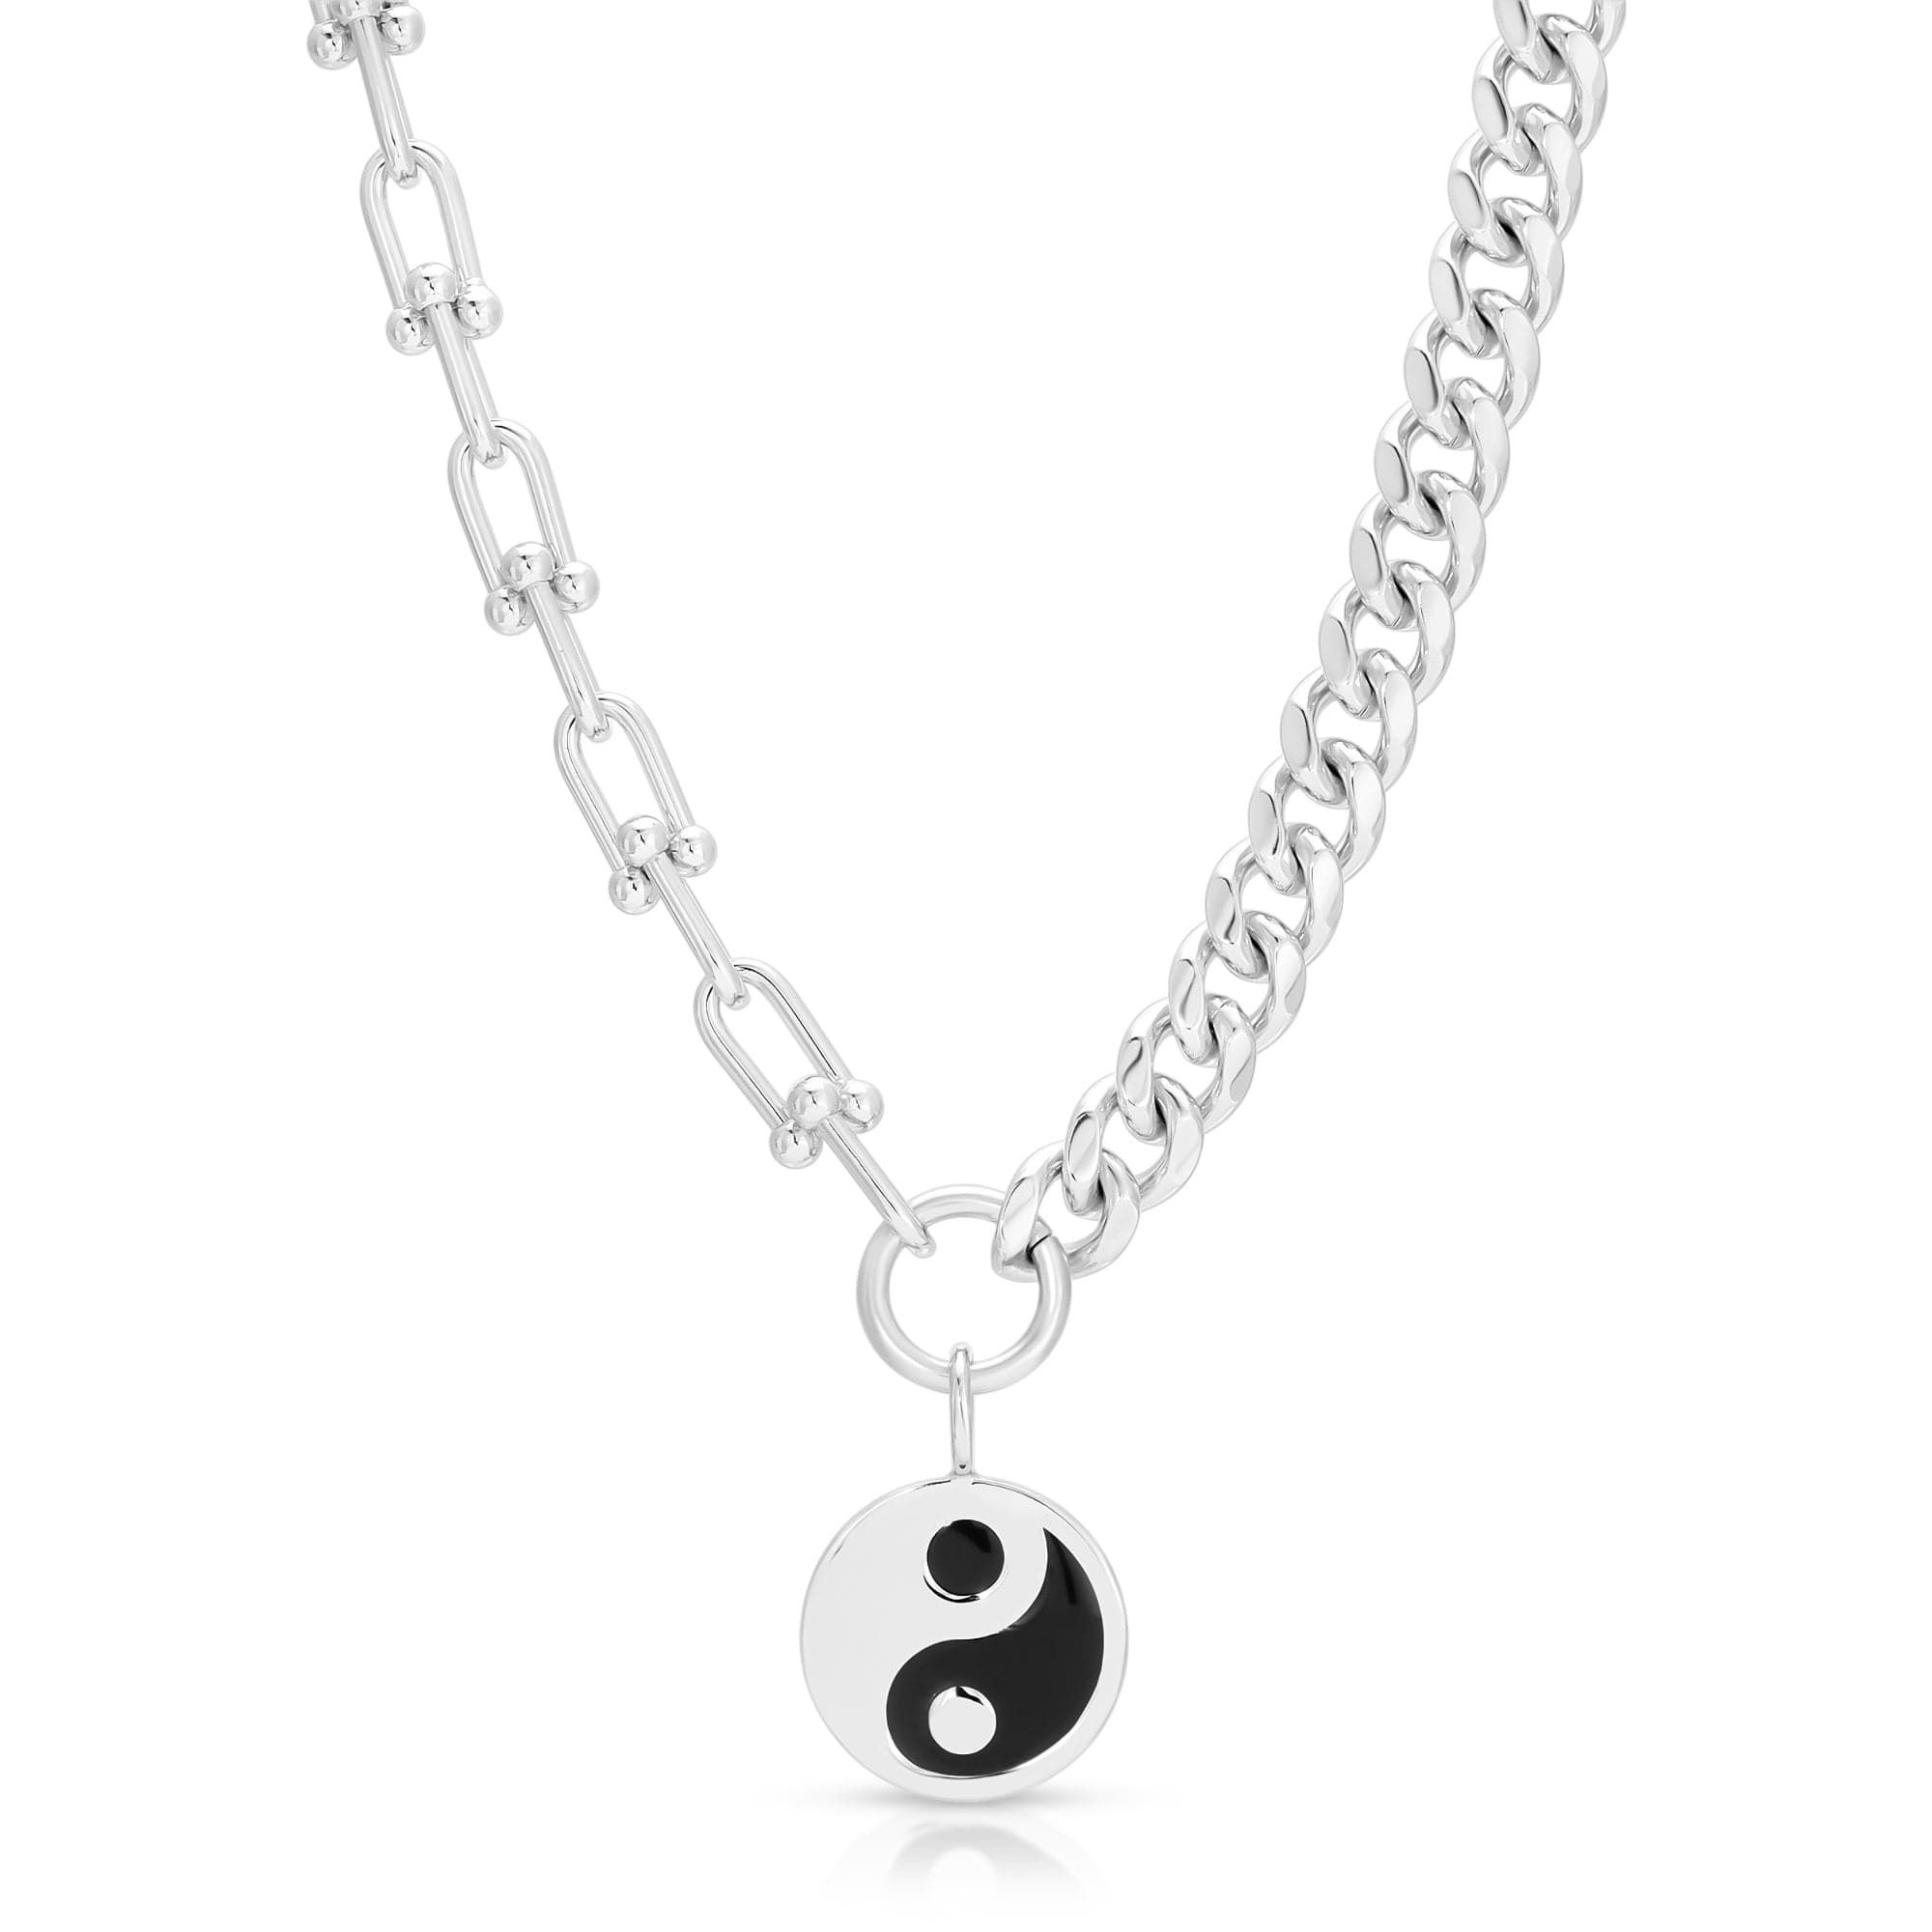 a necklace with a yin symbol on it